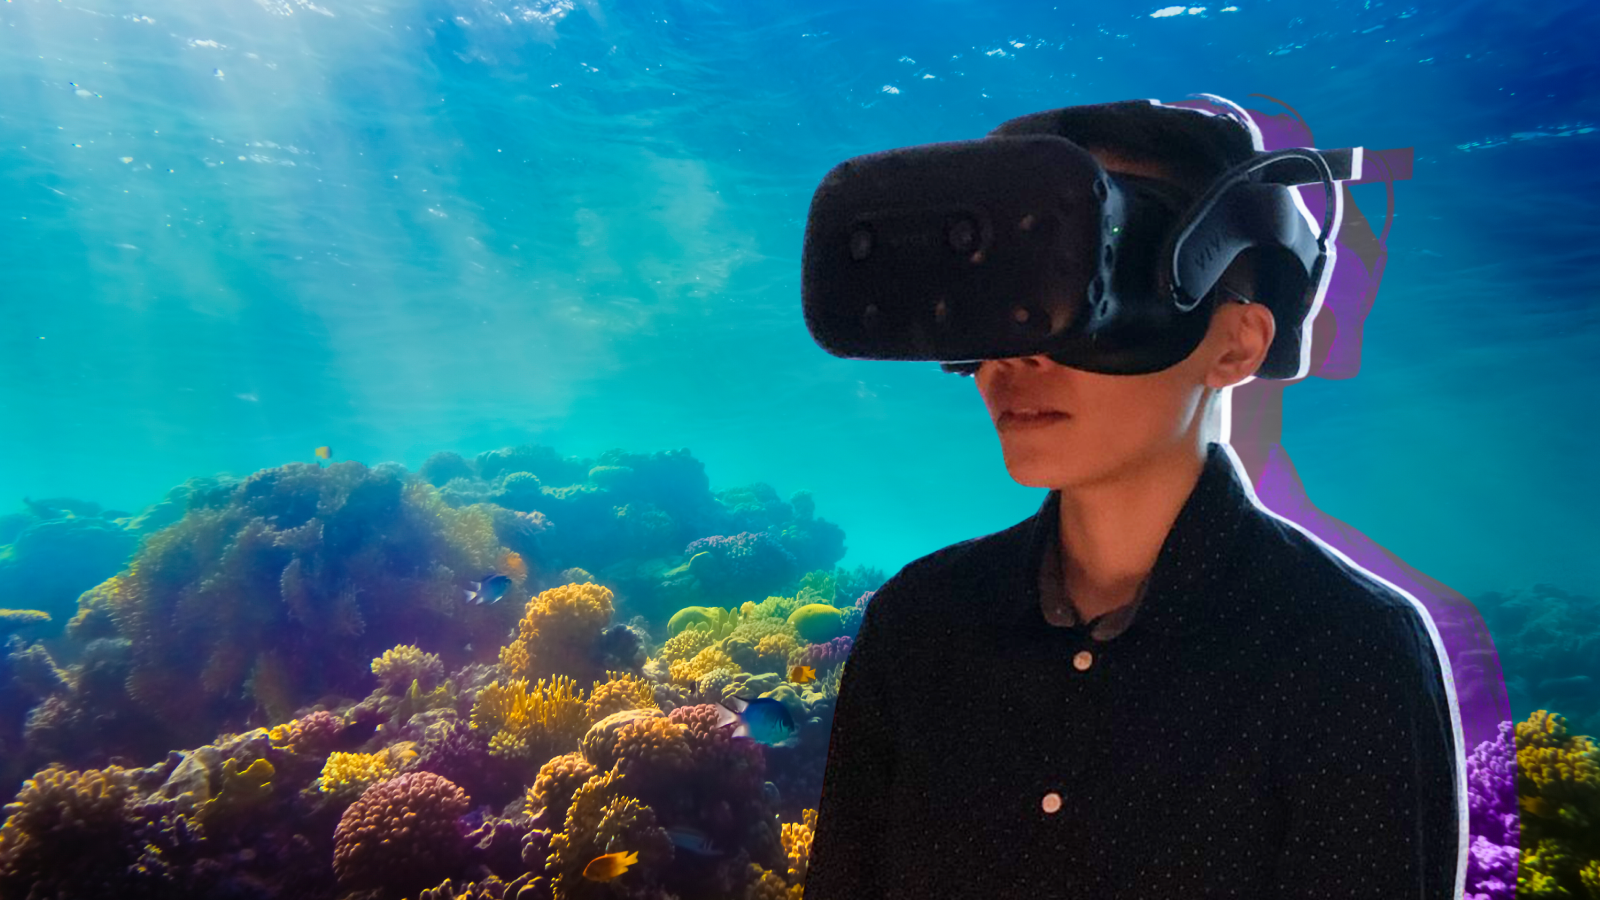 A young student wearing VR goggles, overtop of a coral reef background